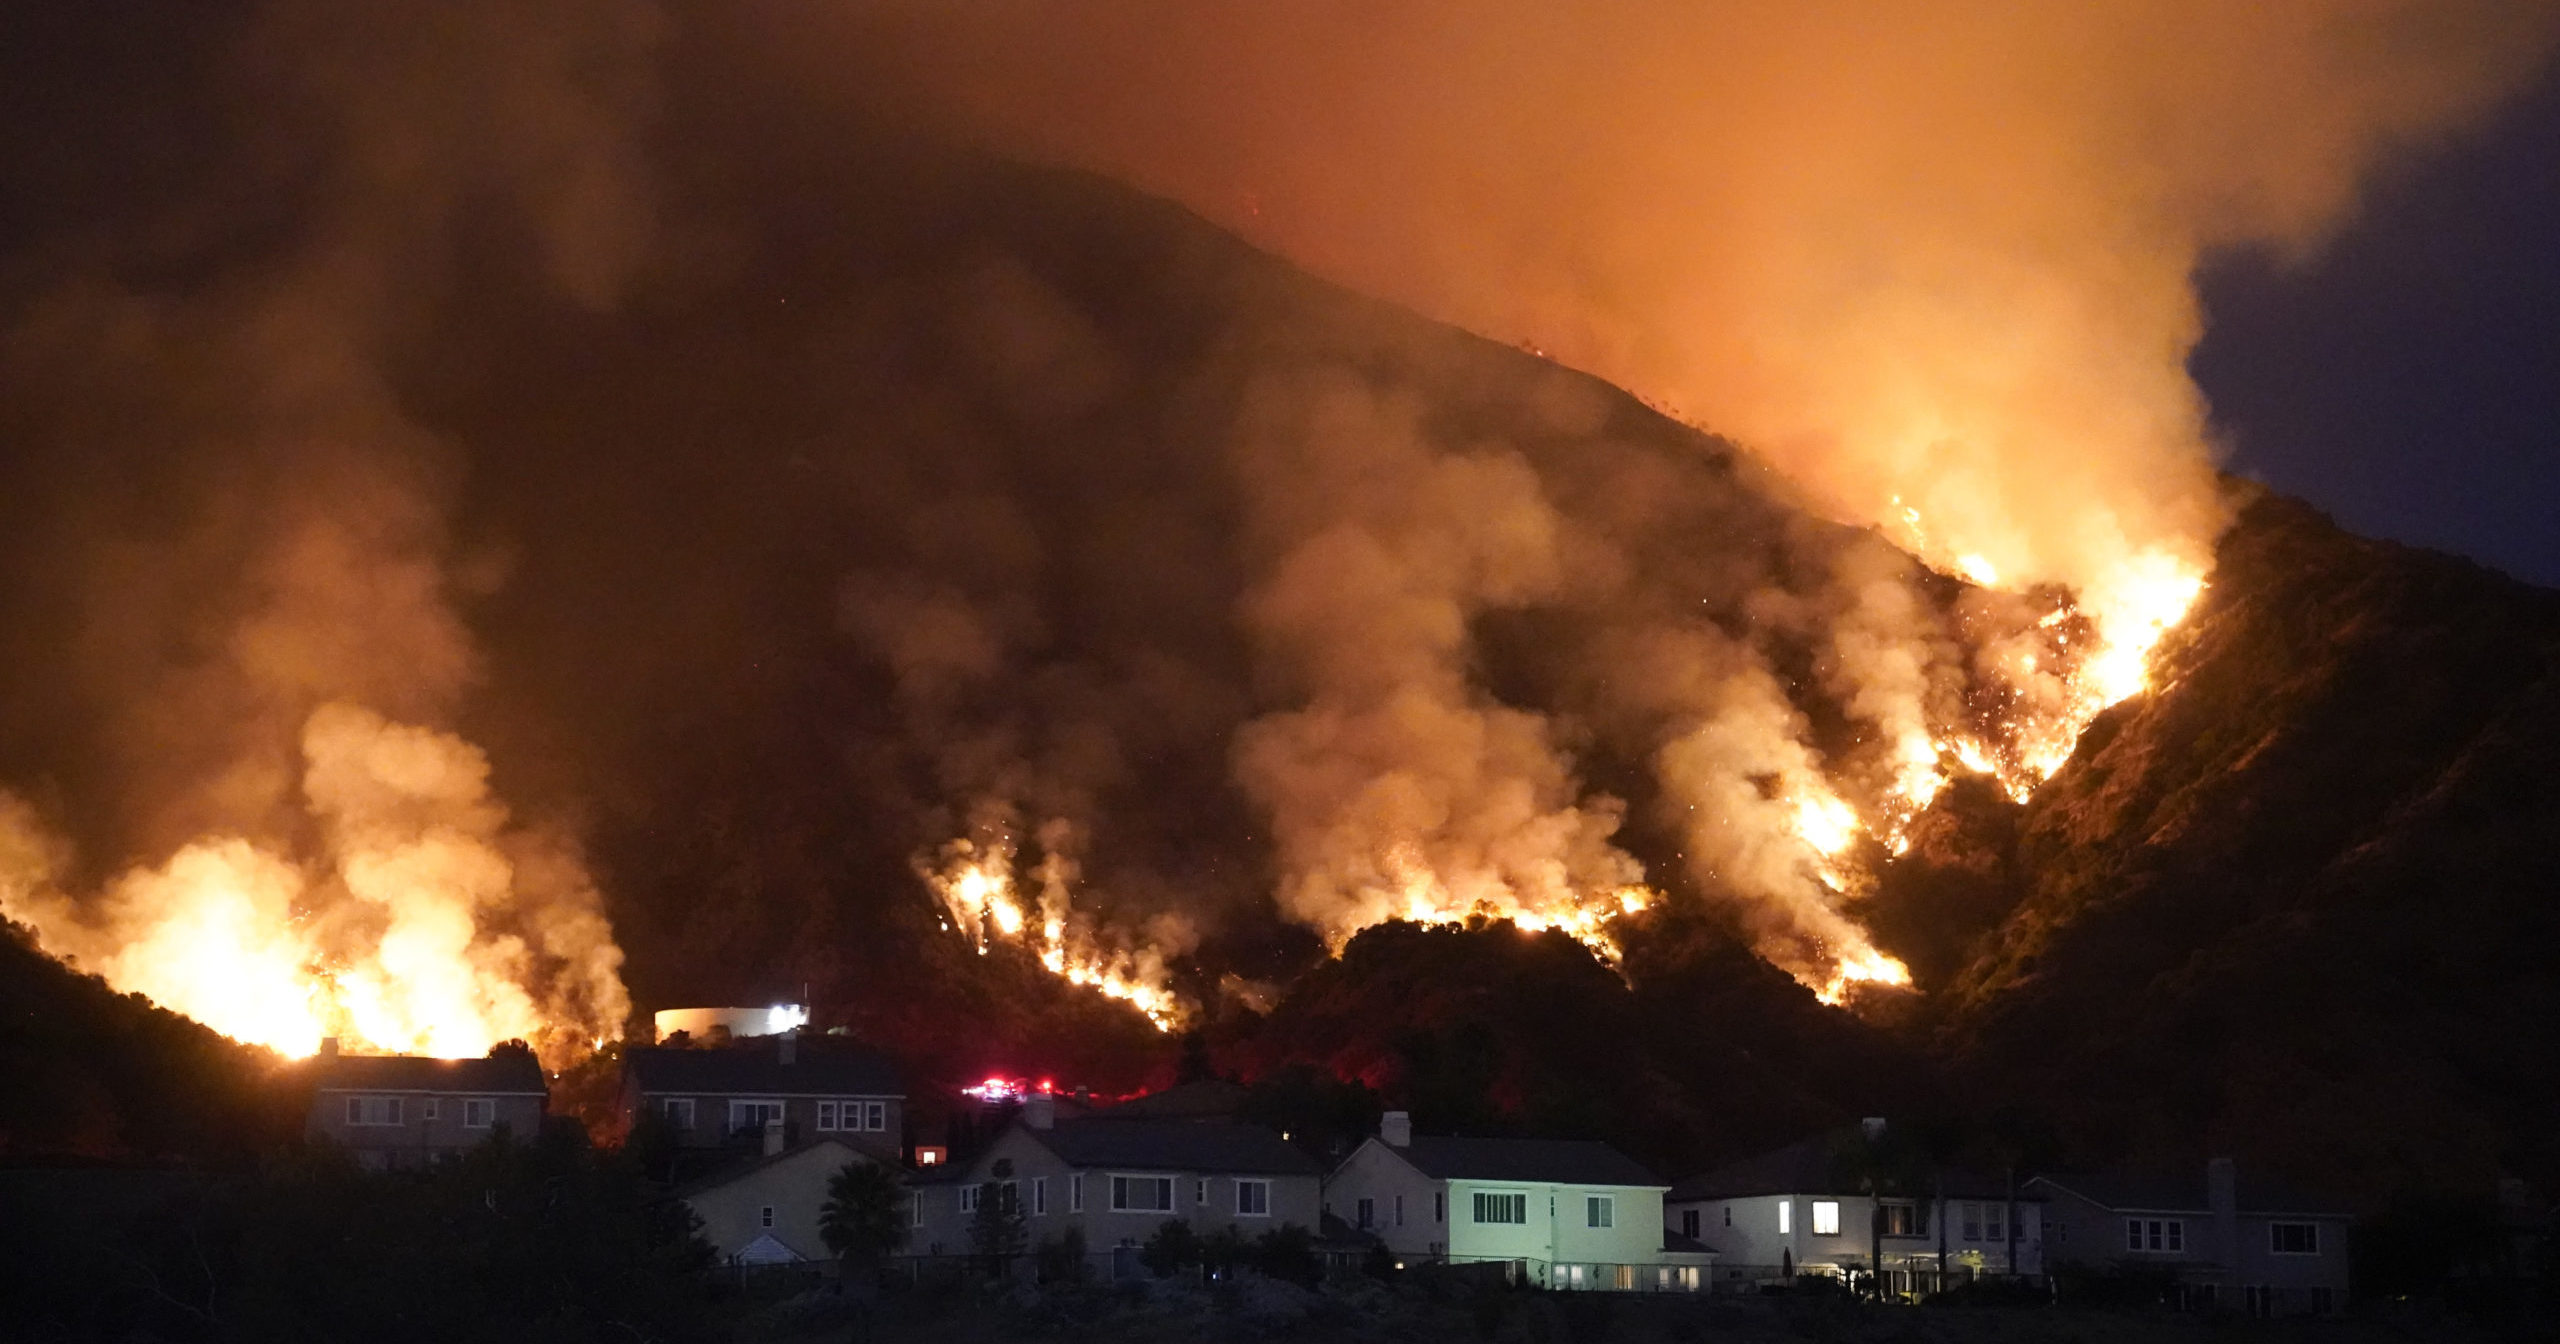 A fire burns through a residential area on Aug. 13, 2020, in Azusa, California. Heat wave conditions were making difficult work for fire crews battling wildfires across Southern California.